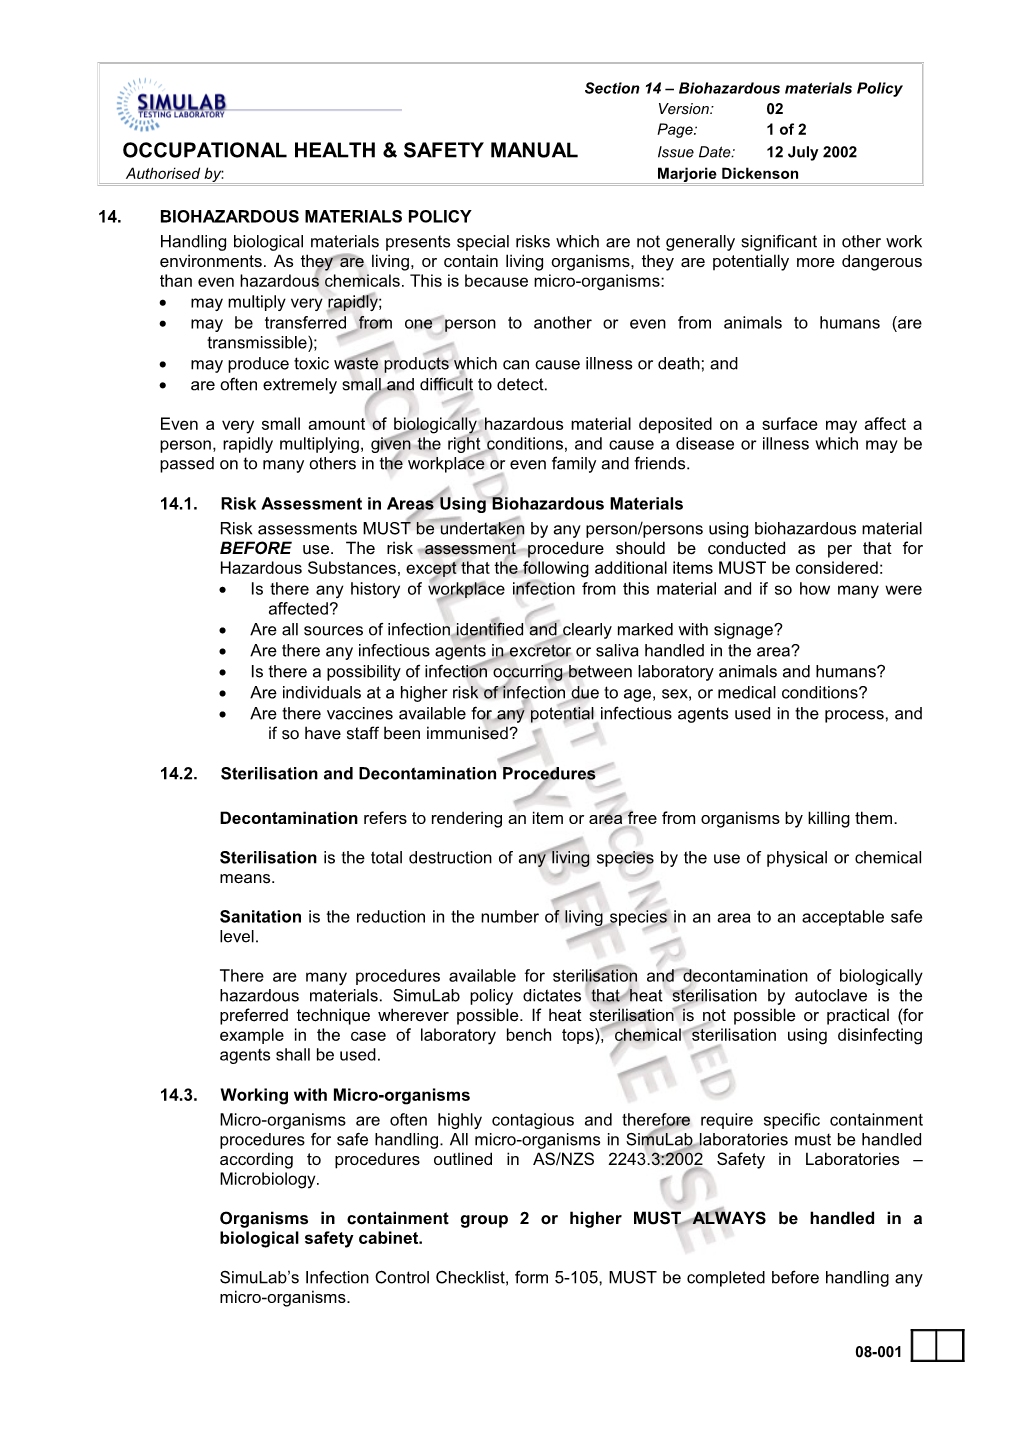 OCCUPATIONAL HEALTH & SAFETY MANUAL Issue Date:12 July 2002